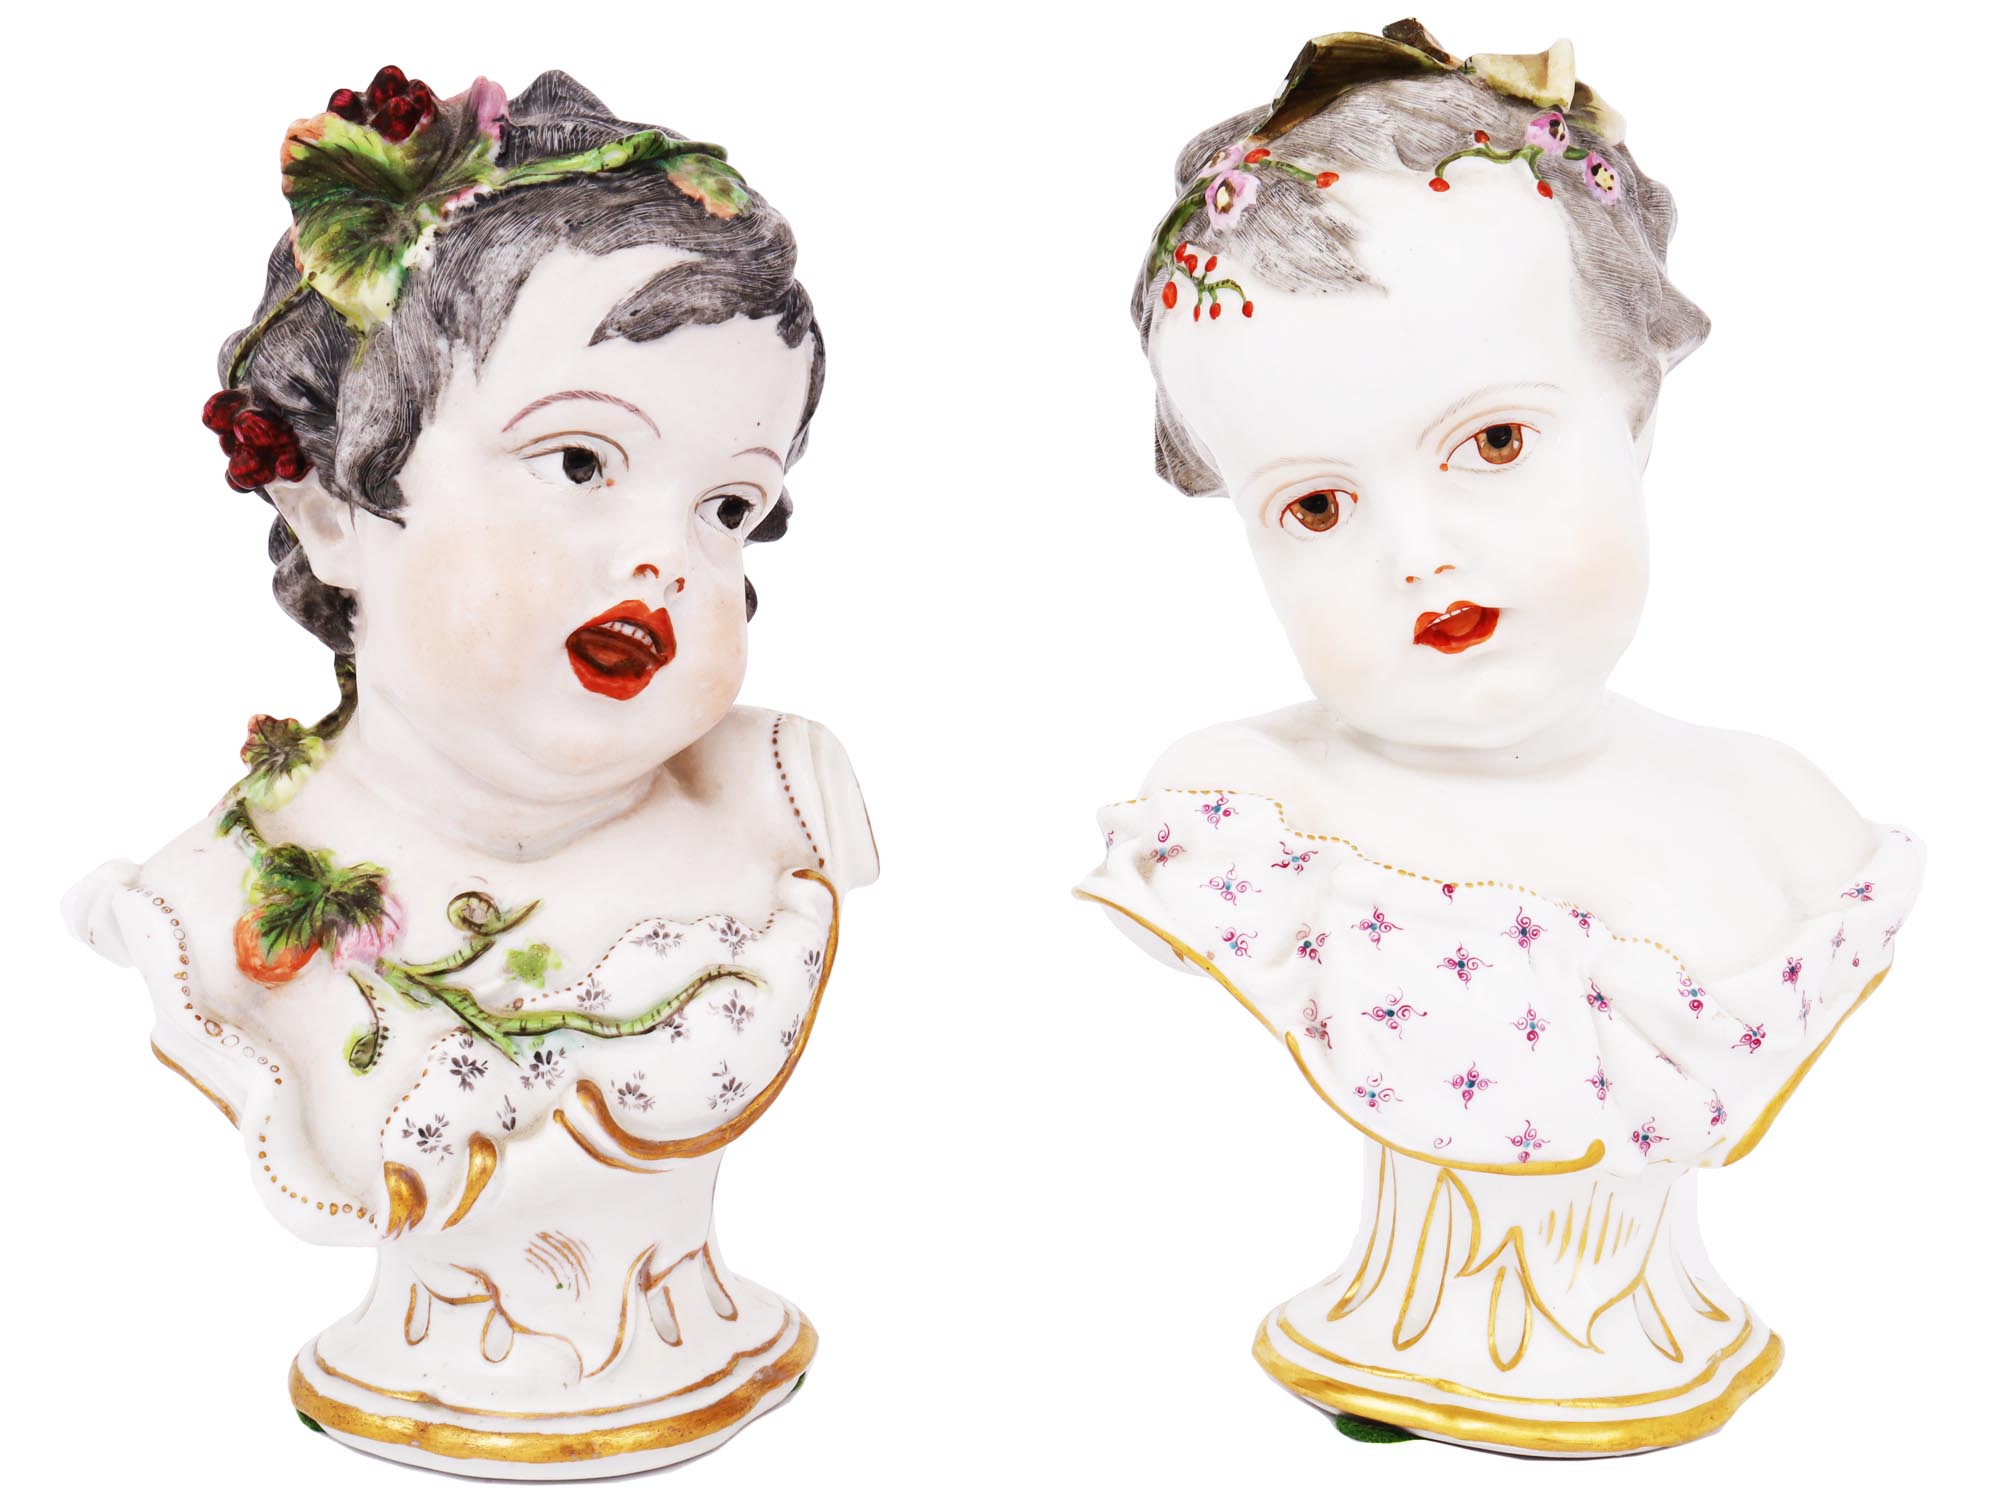 ANTIQUE GERMAN HAND PAINTED PORCELAIN BABY BUSTS PIC-0